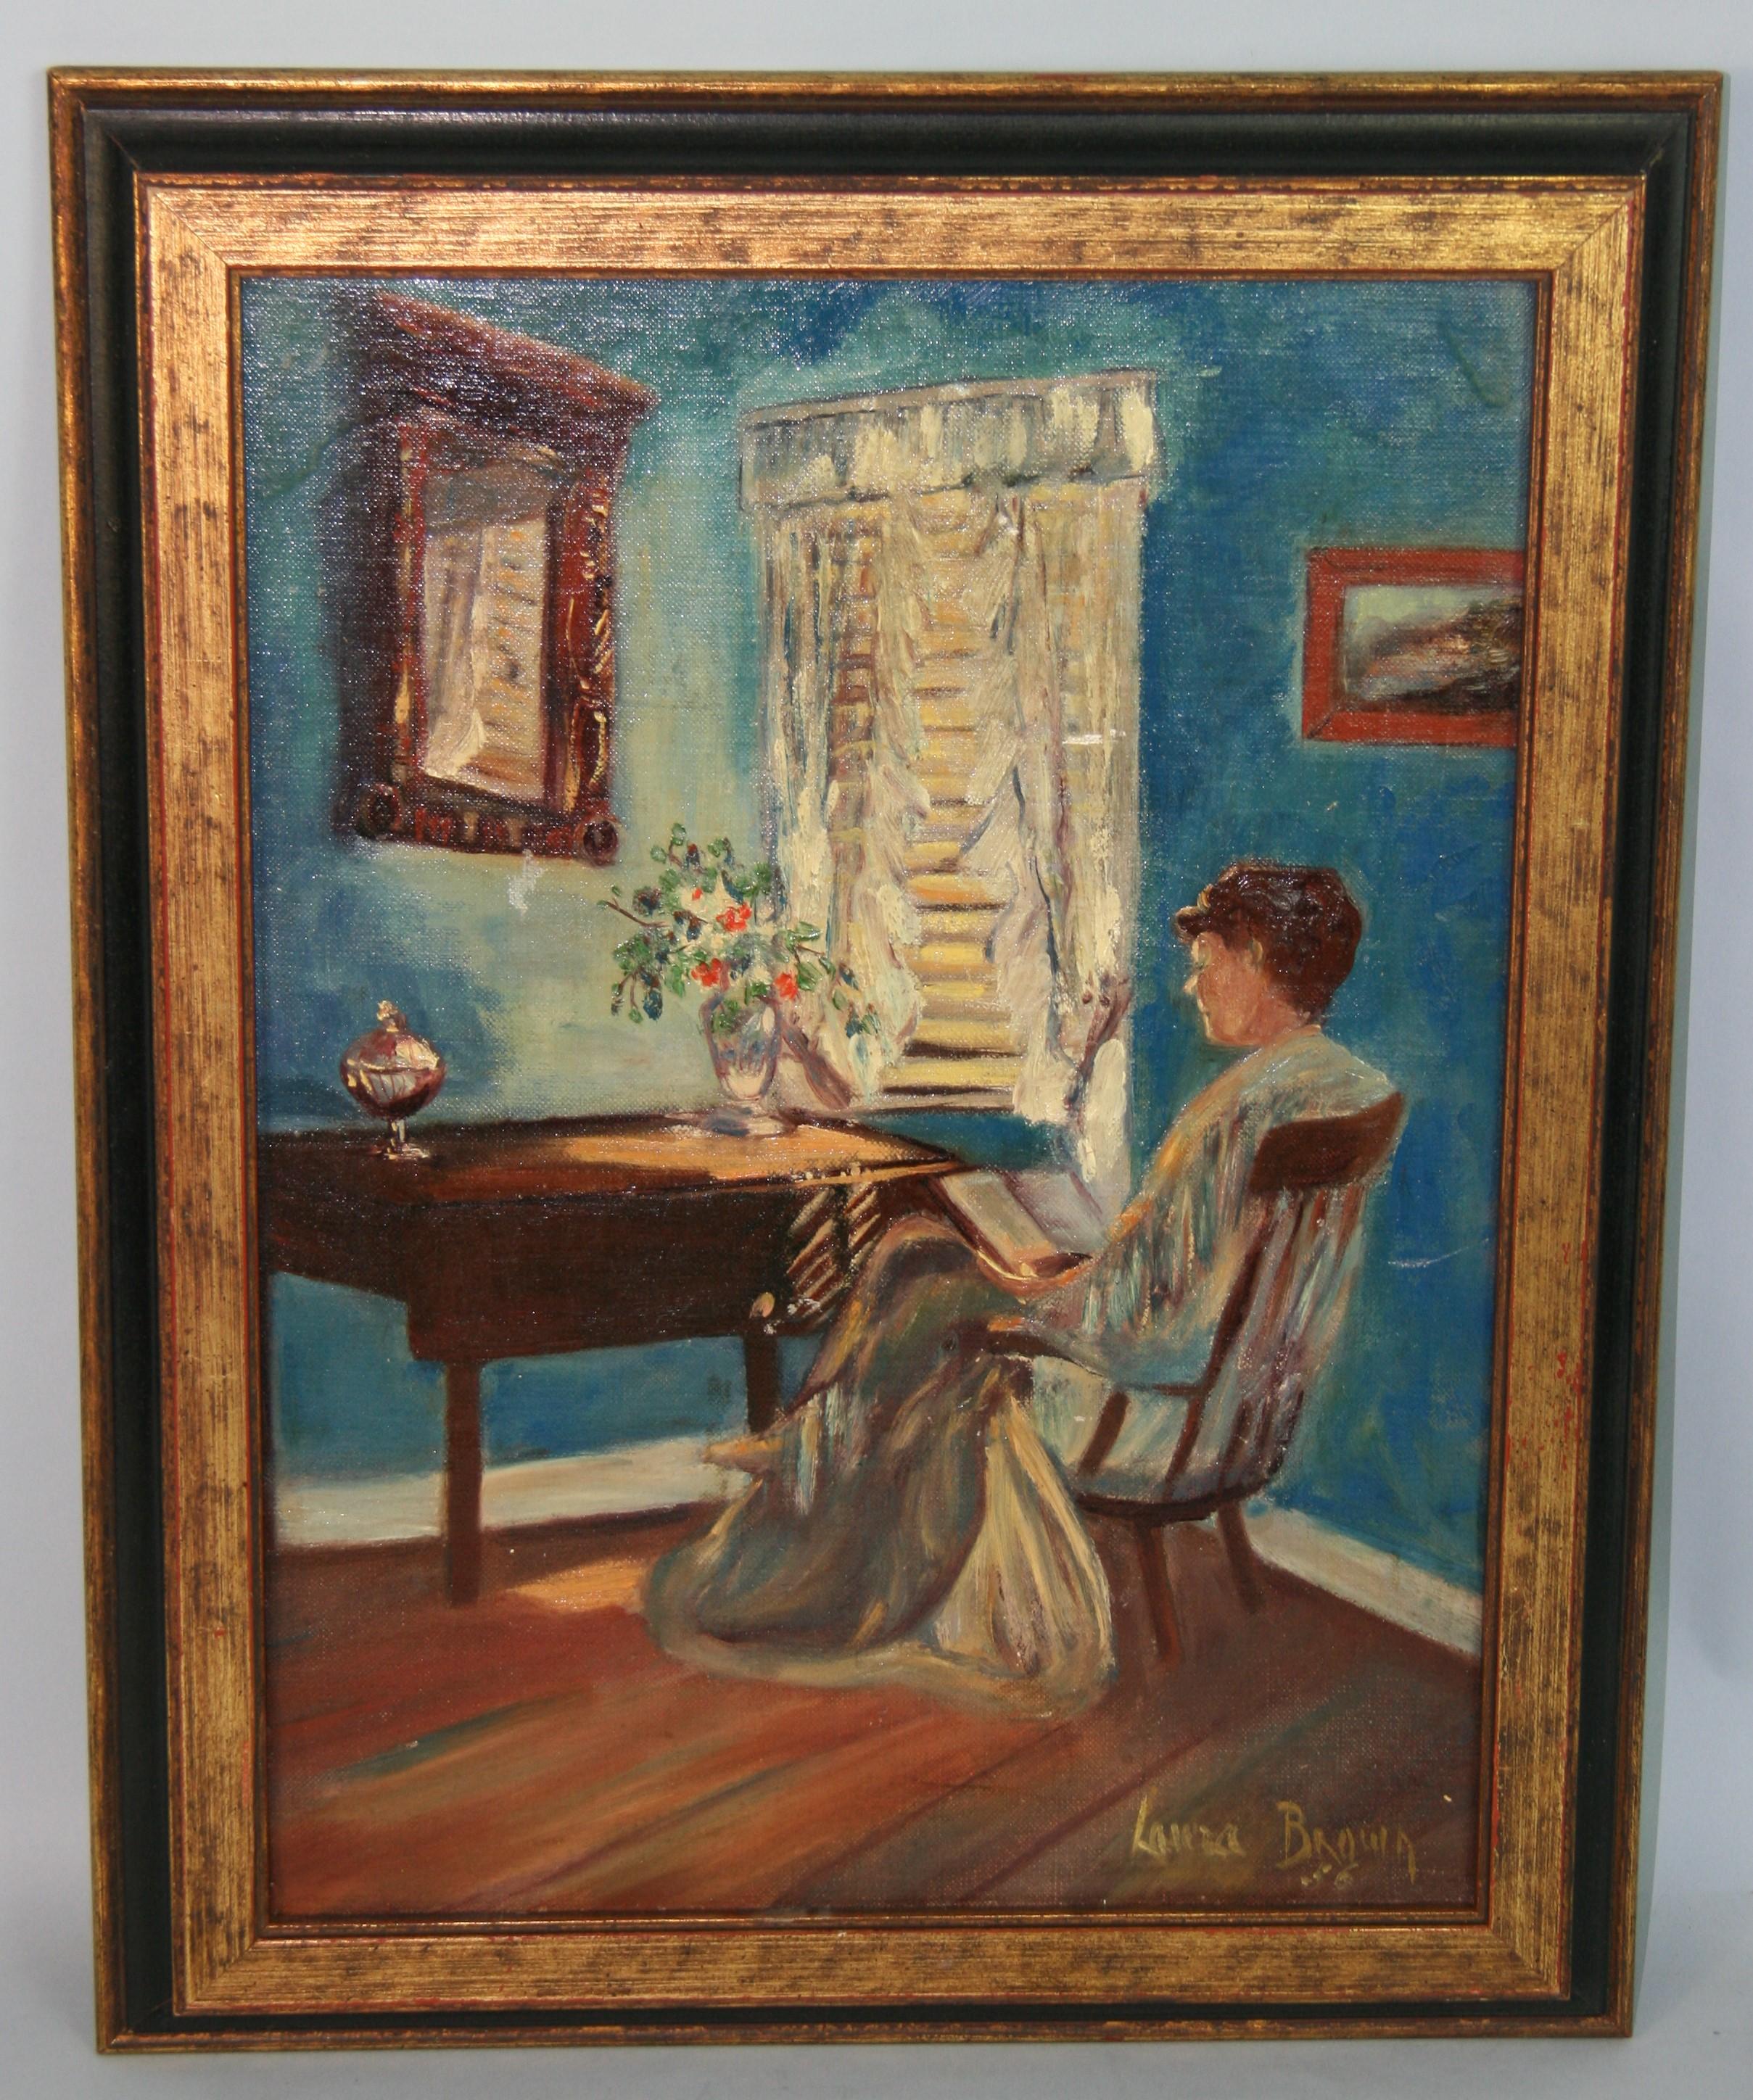 Unknown Interior Painting - Antique American Impressionist Interior Scene Woman Reading by the Window 1956